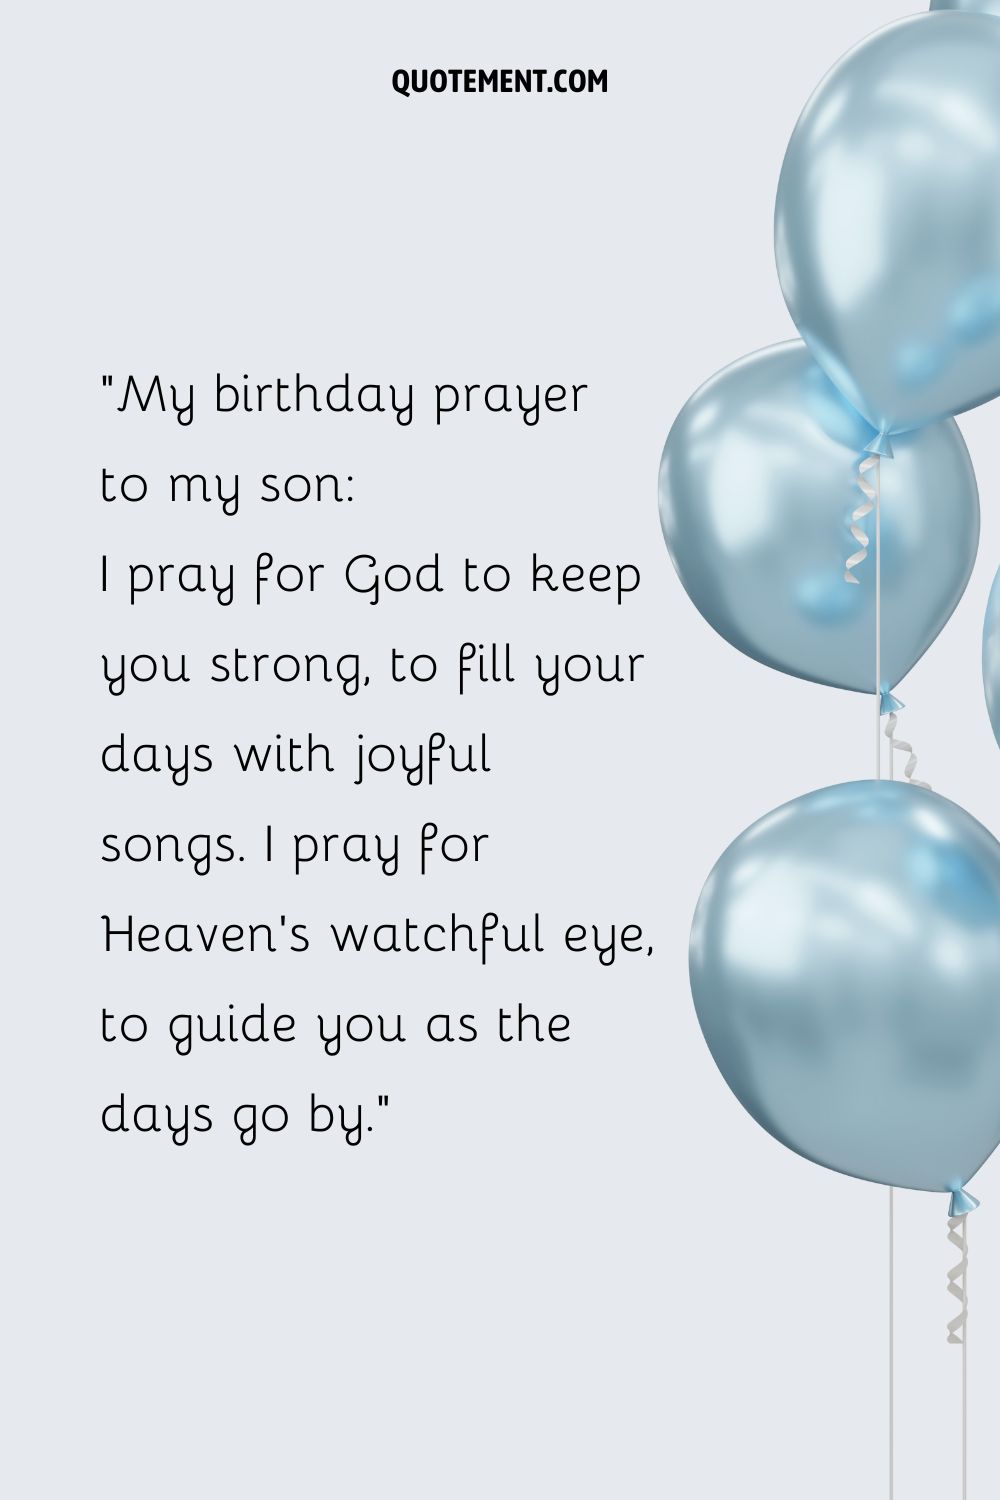 Metallic blue balloons representing a special birthday prayer to my son